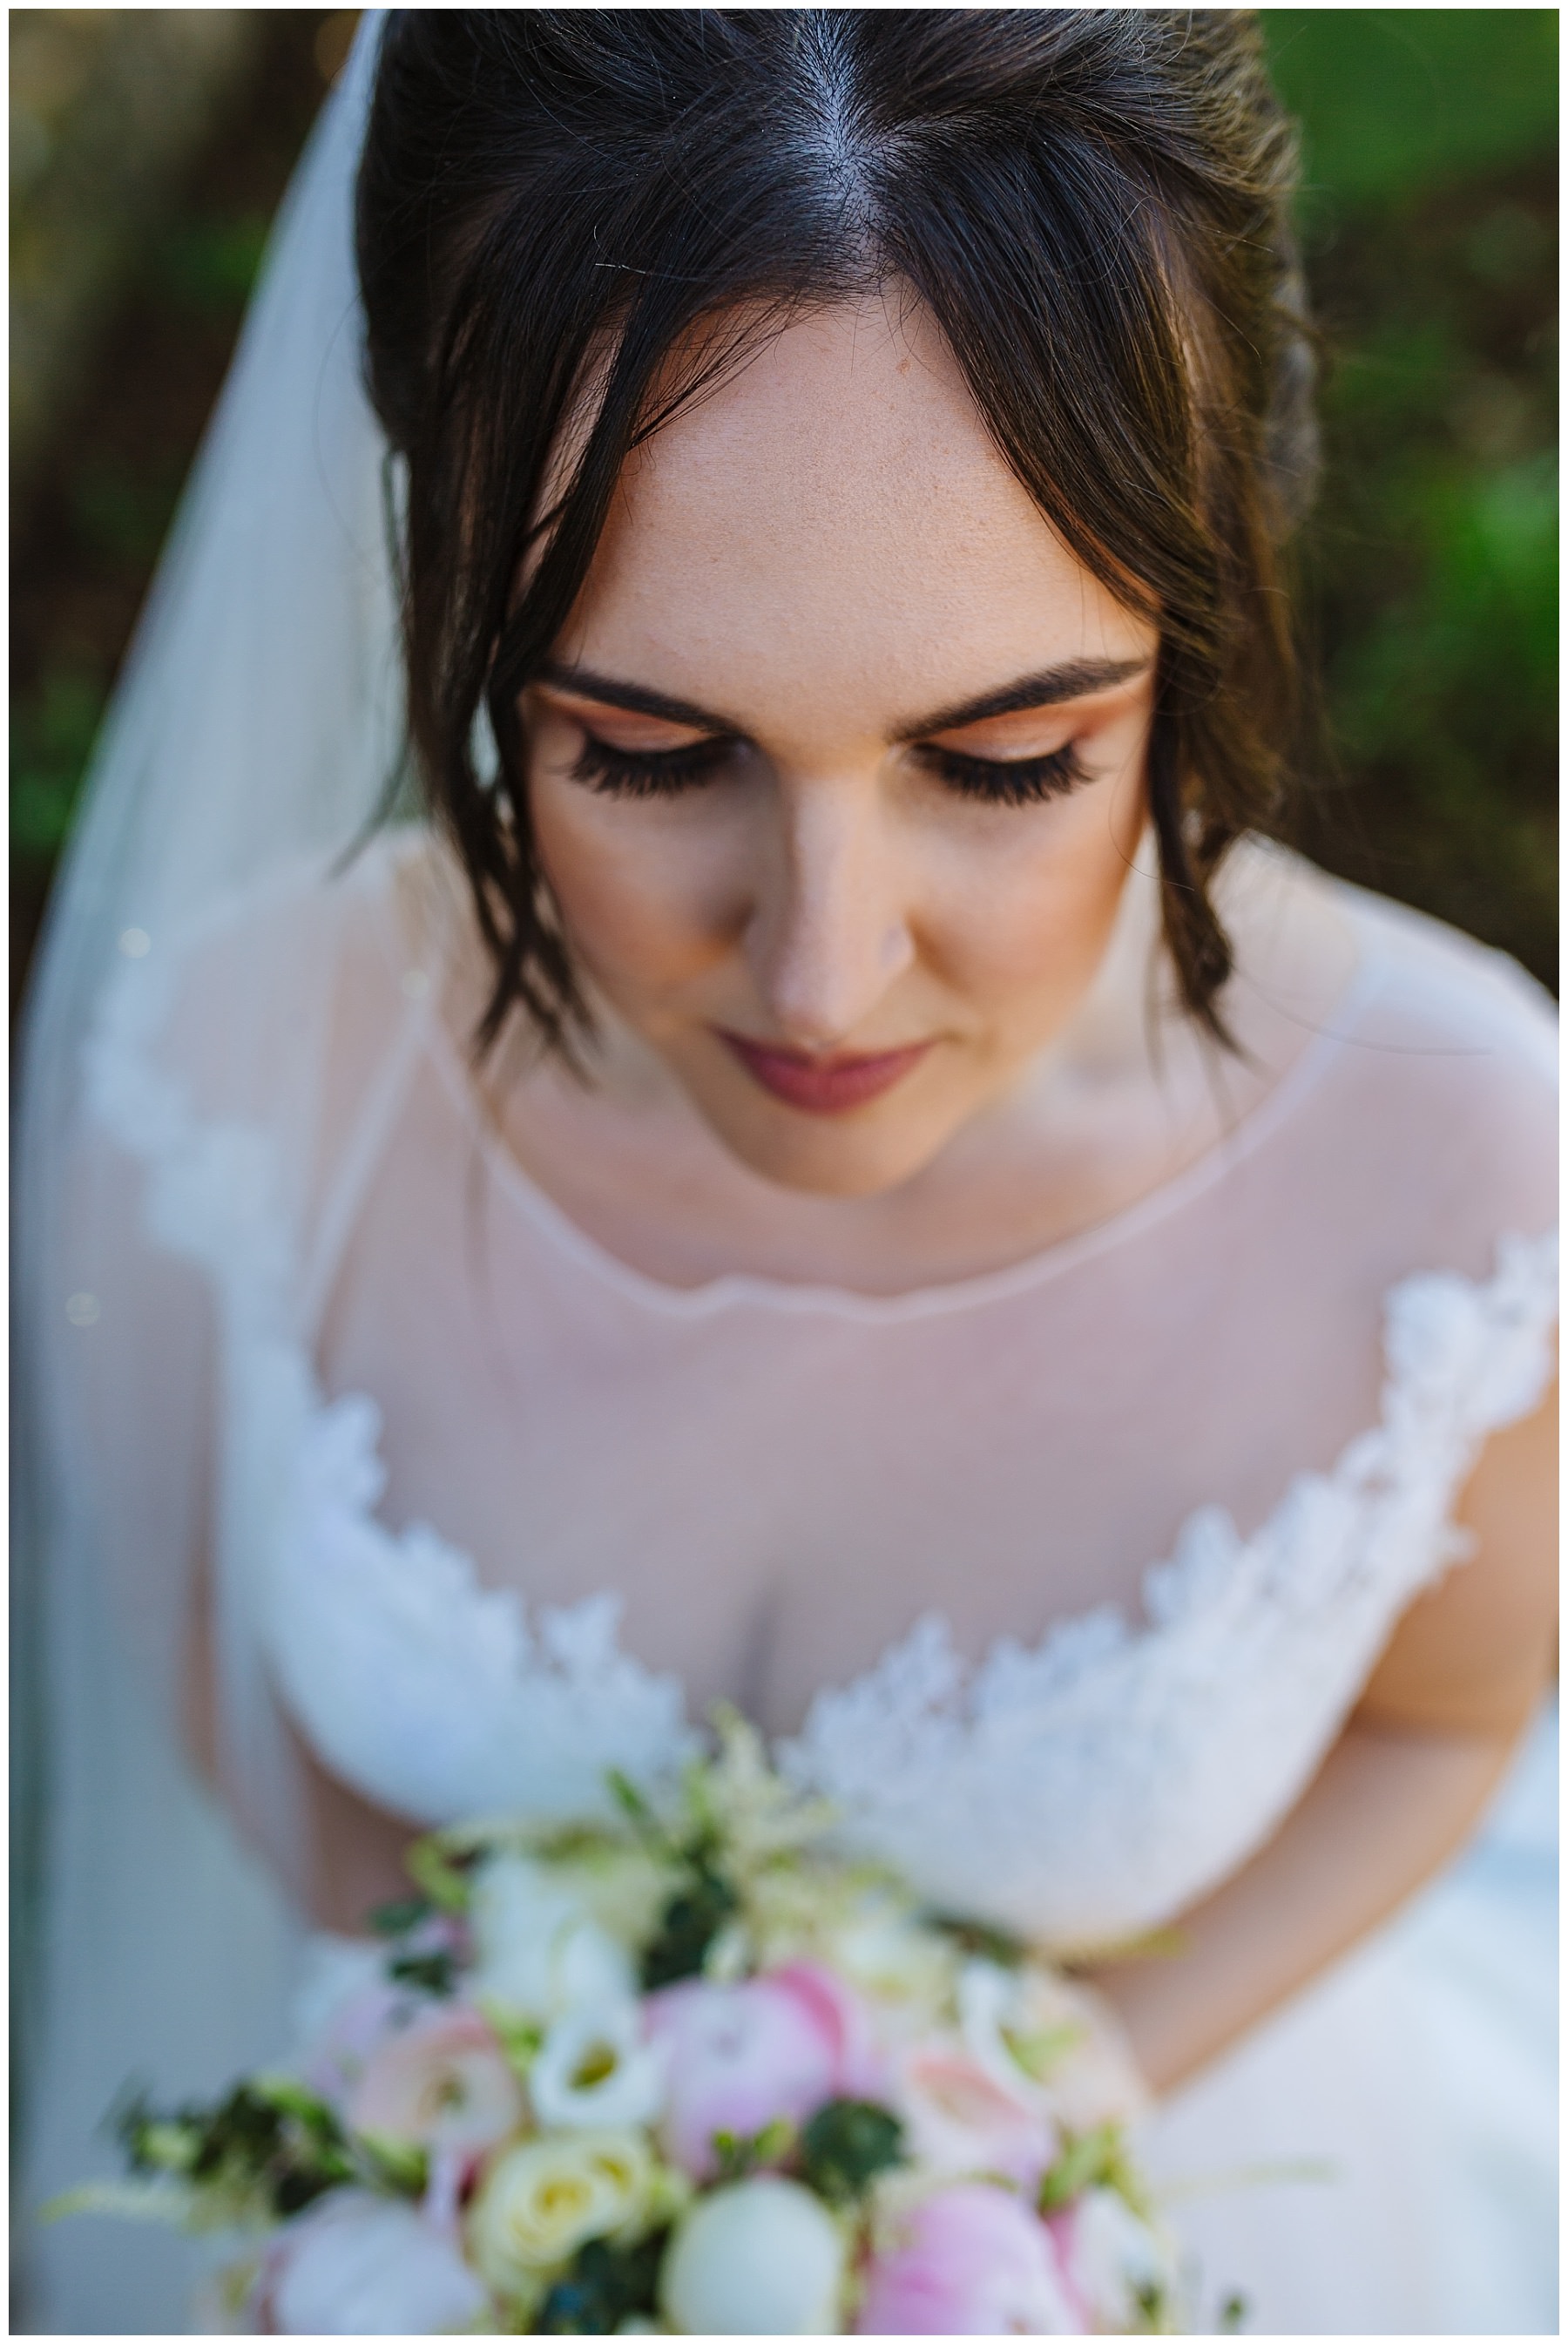 Bridal portrait showing hair and make up and flowers